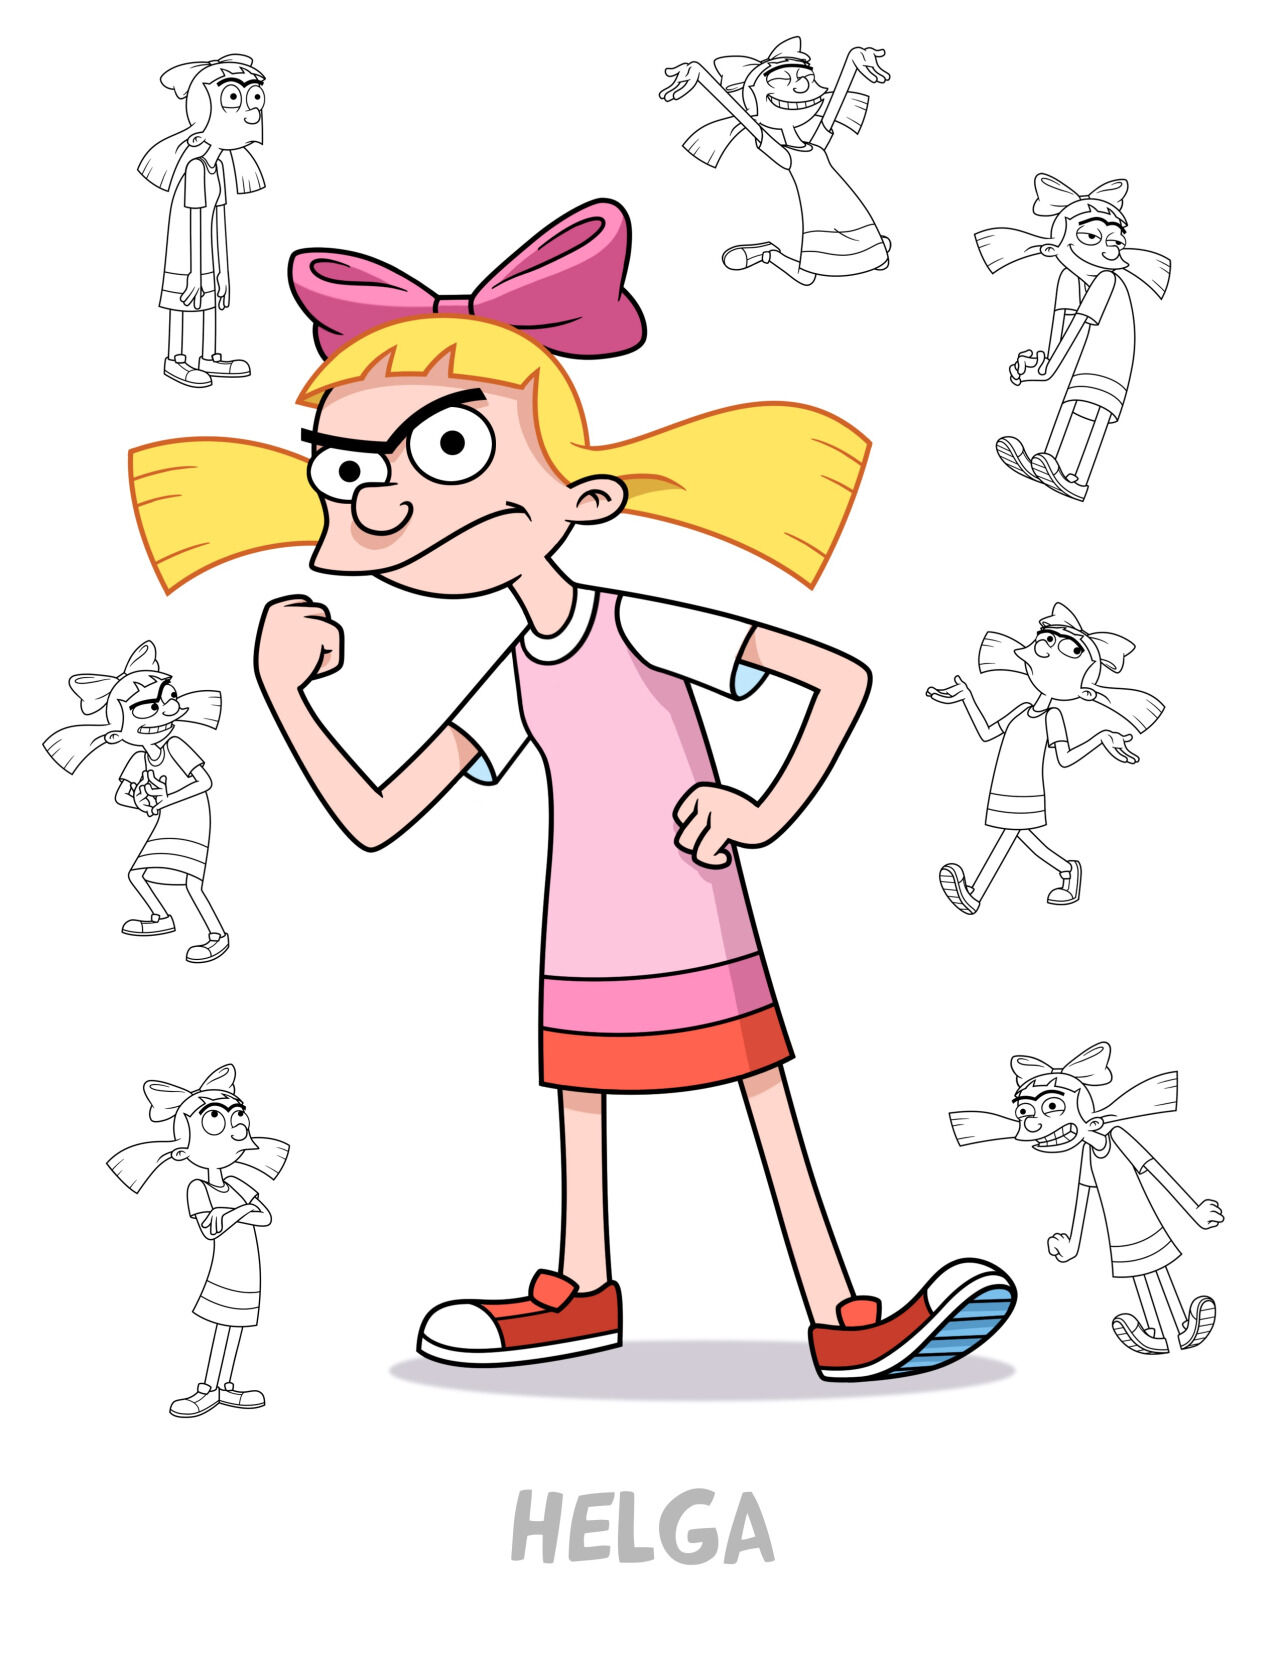 hey arnold characters as teenagers